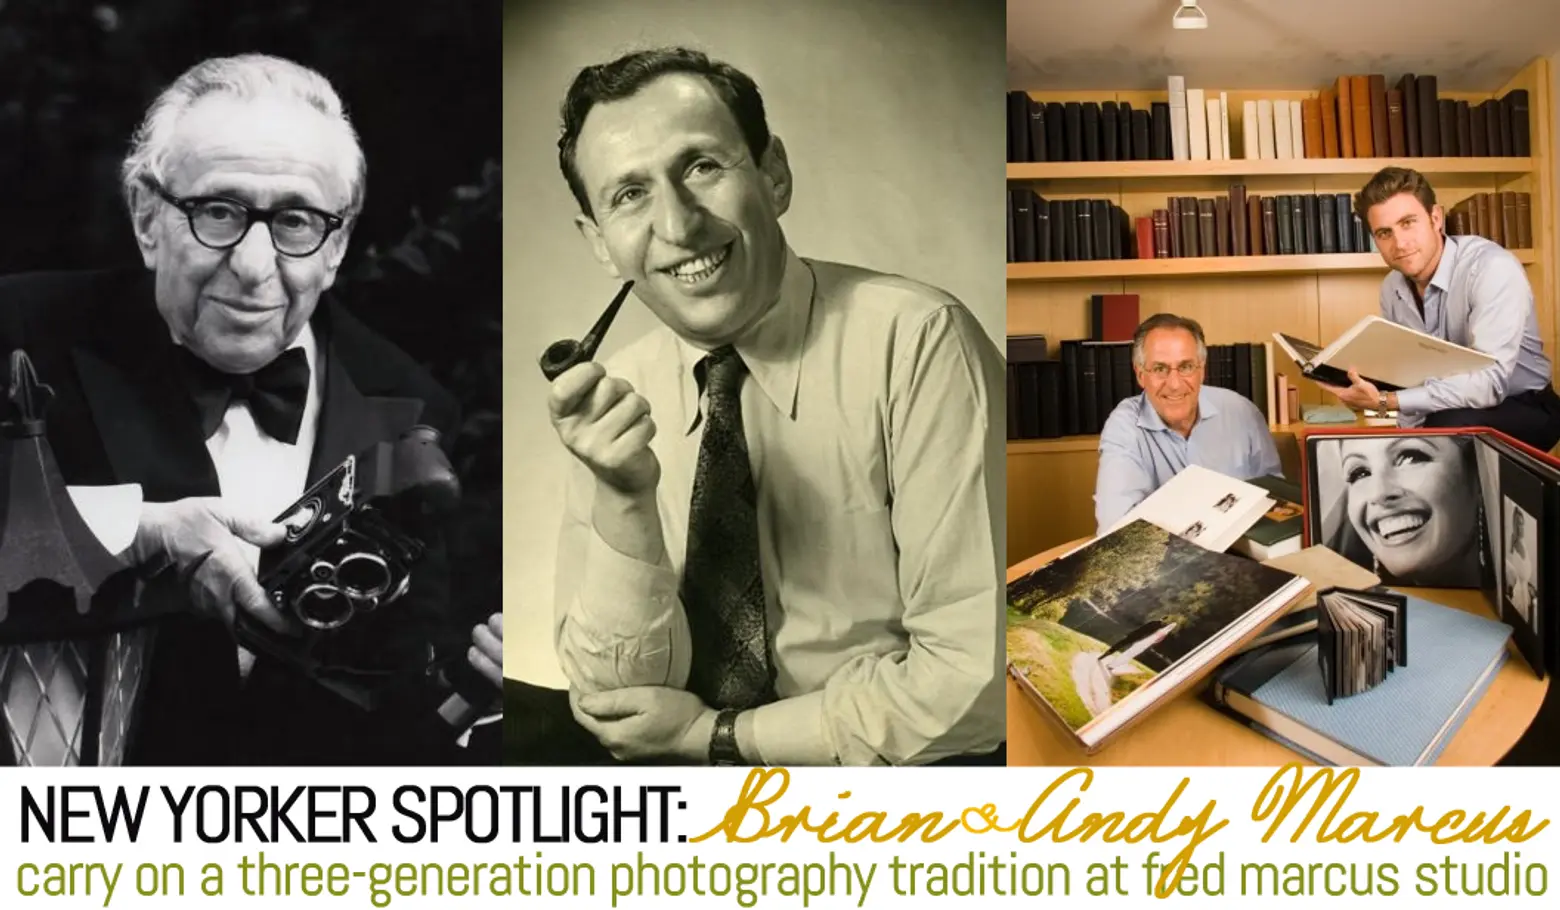 New Yorker Spotlight: Brian and Andy Marcus Carry On a Three-Generation Photography Tradition